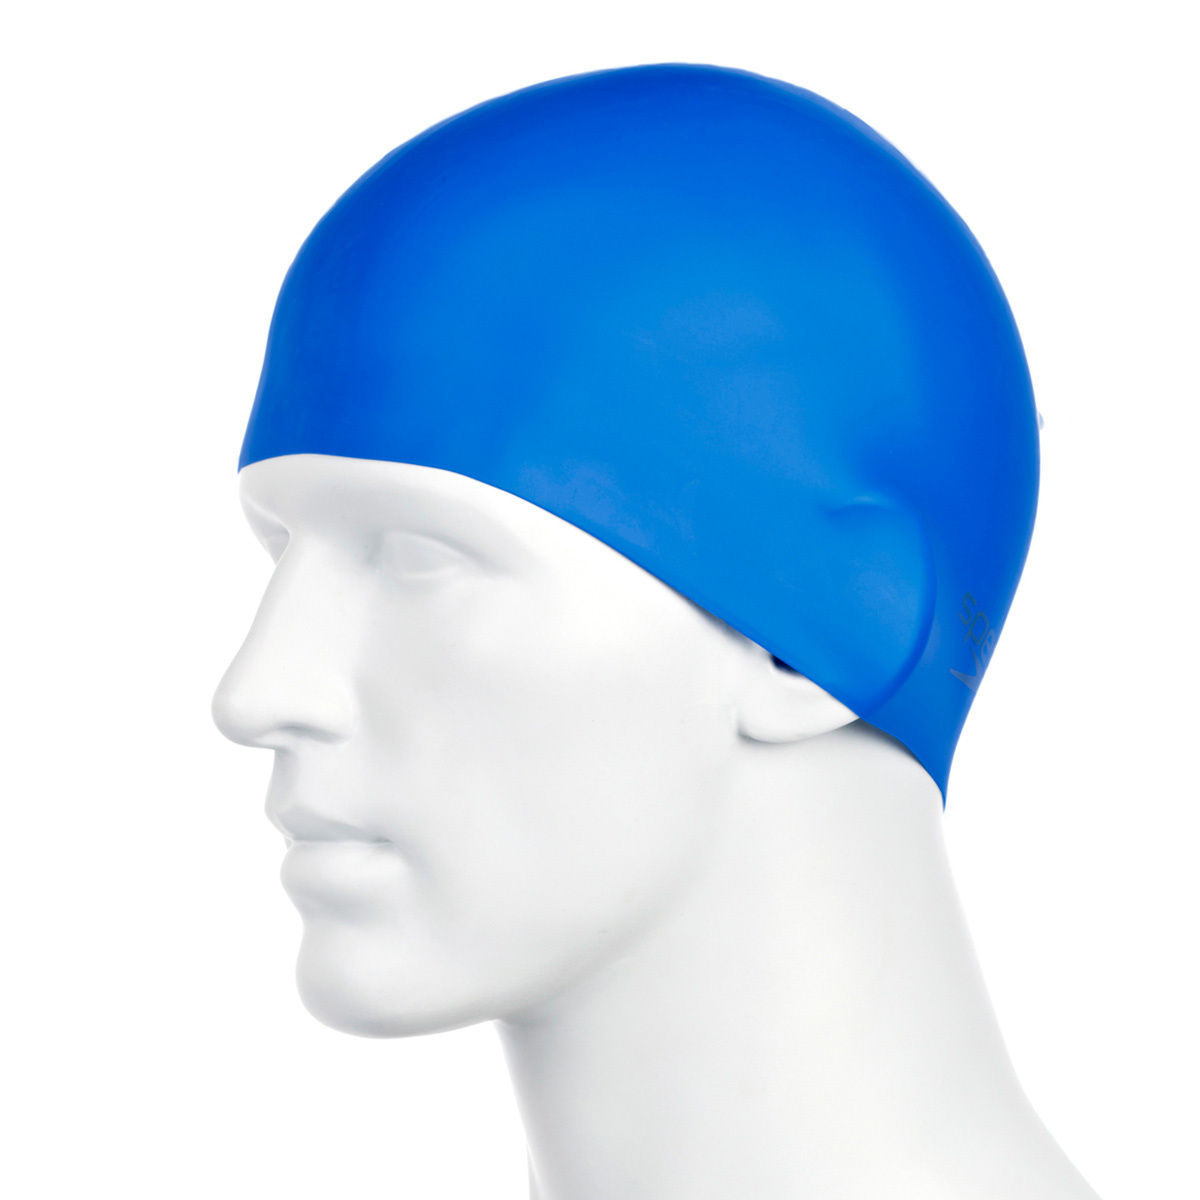 Buy swimming cap Online @ ₹199 from ShopClues